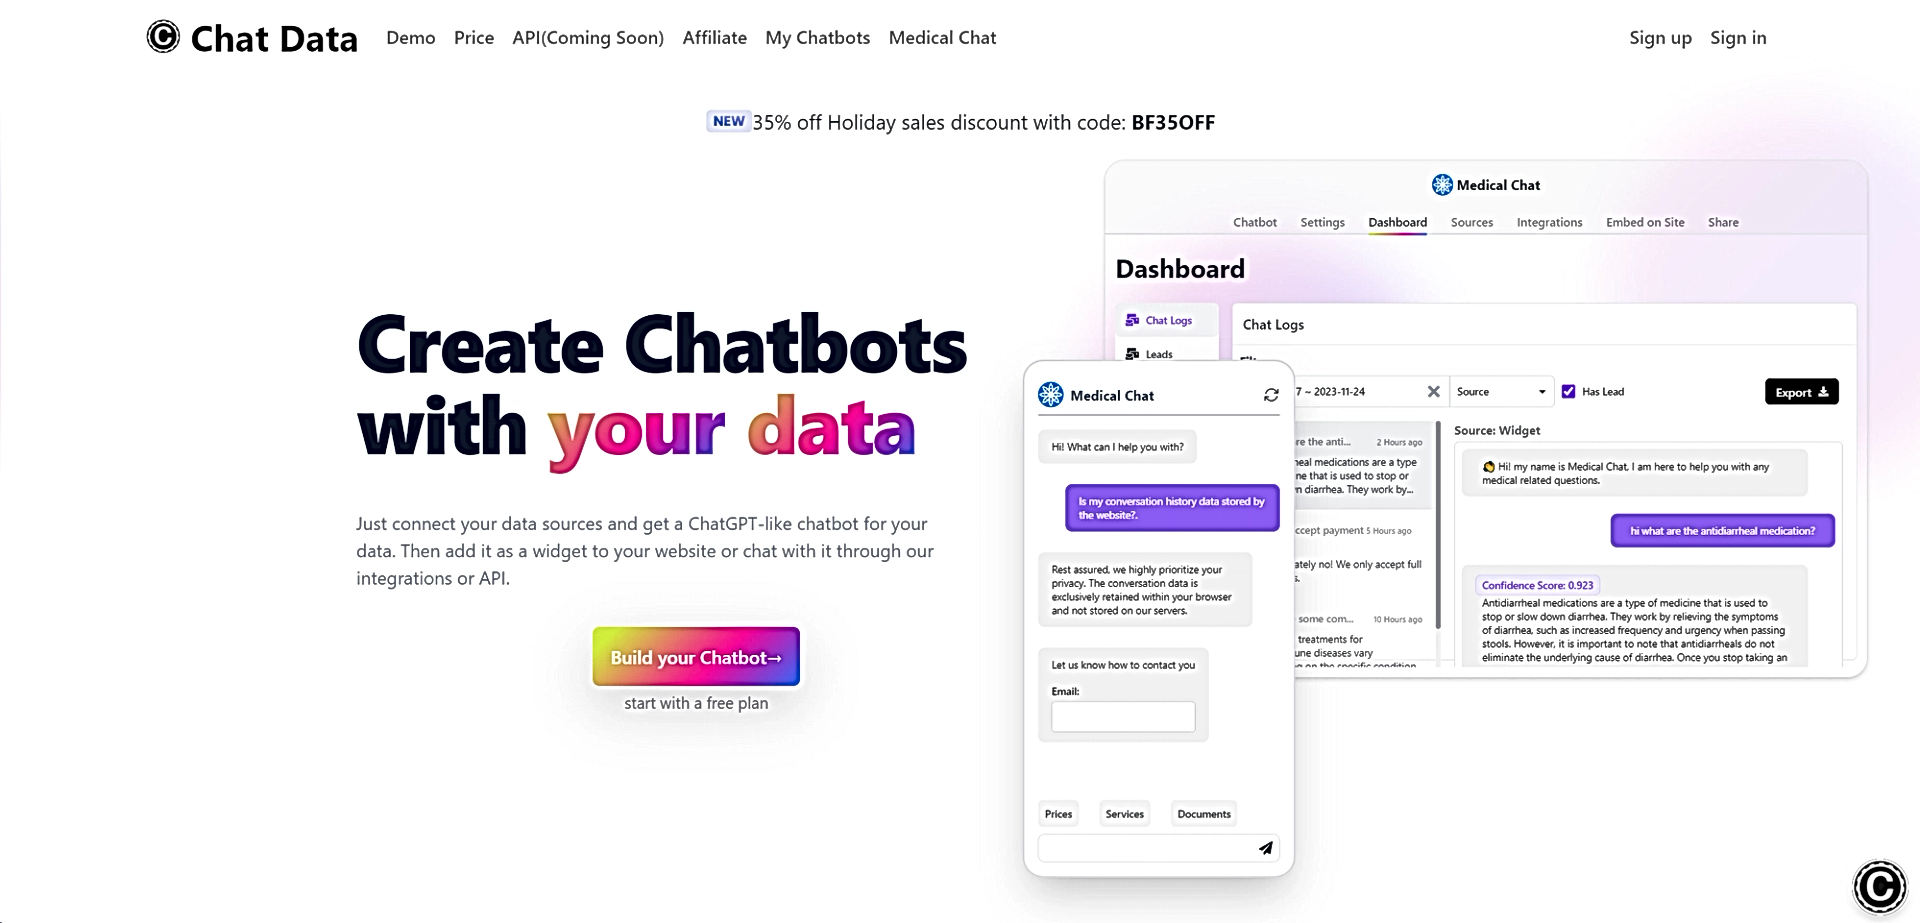 Chat Data featured